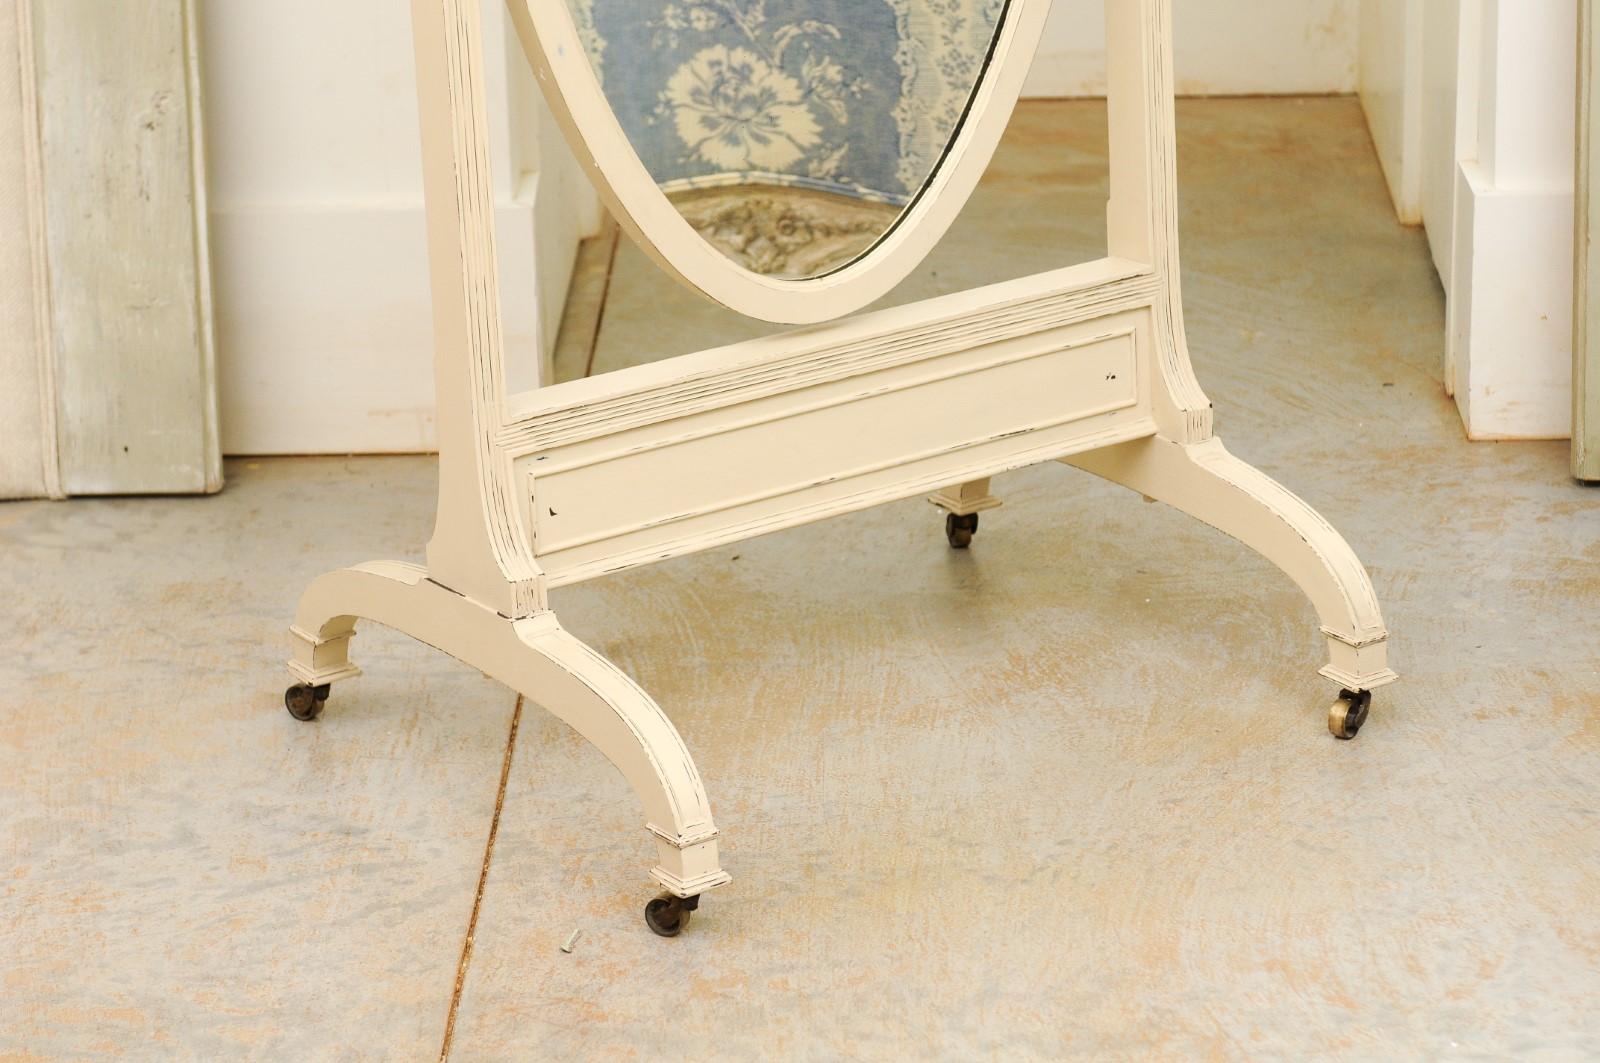 English 19th Century Painted Wood Cheval Mirror with Oval Plate and Casters For Sale 1